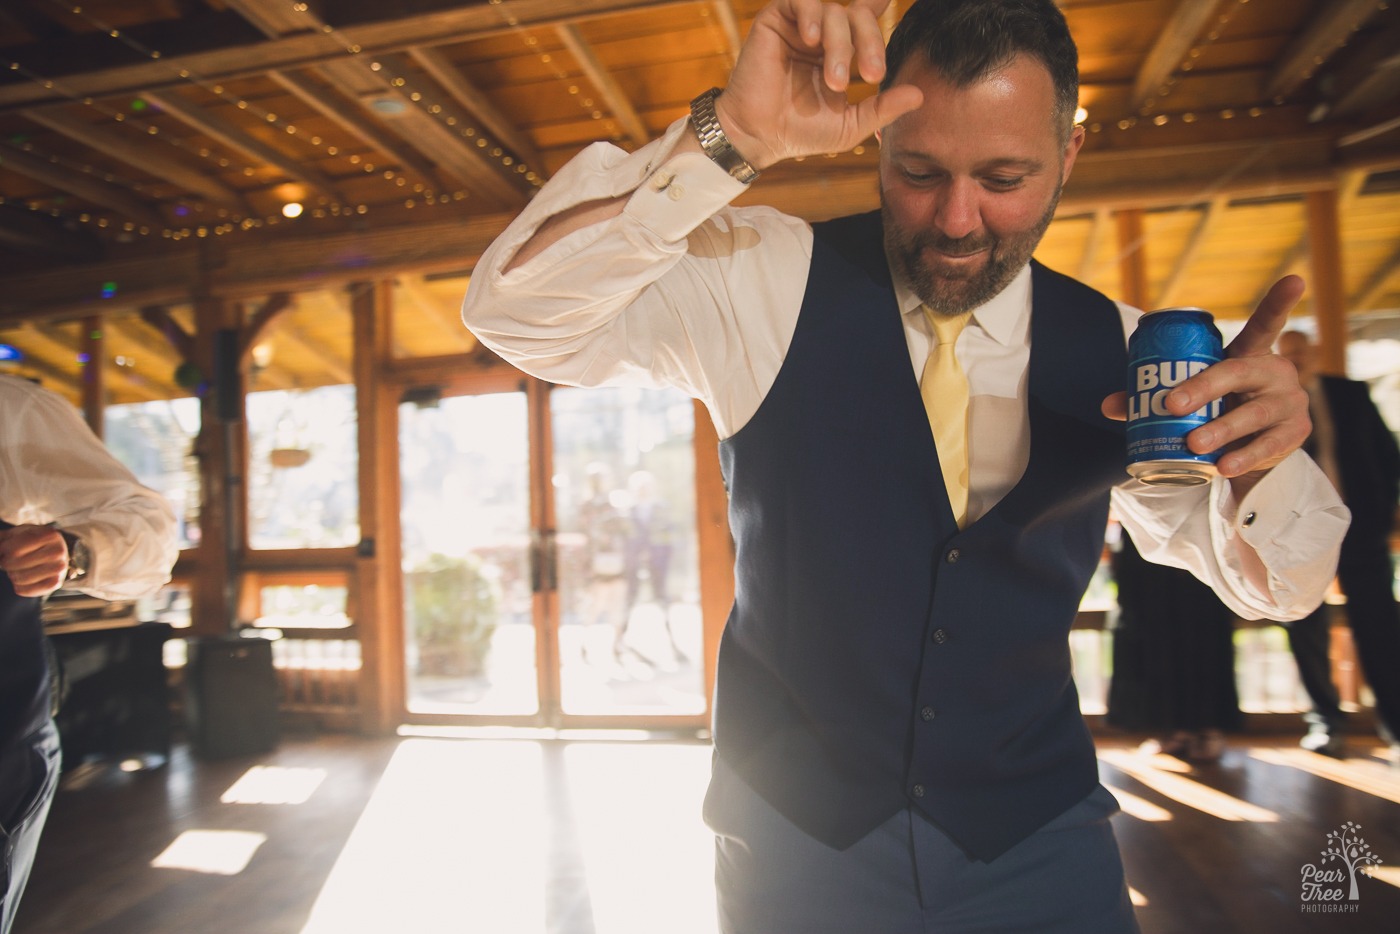 Groomsman dancing with a Bud Light can in hand